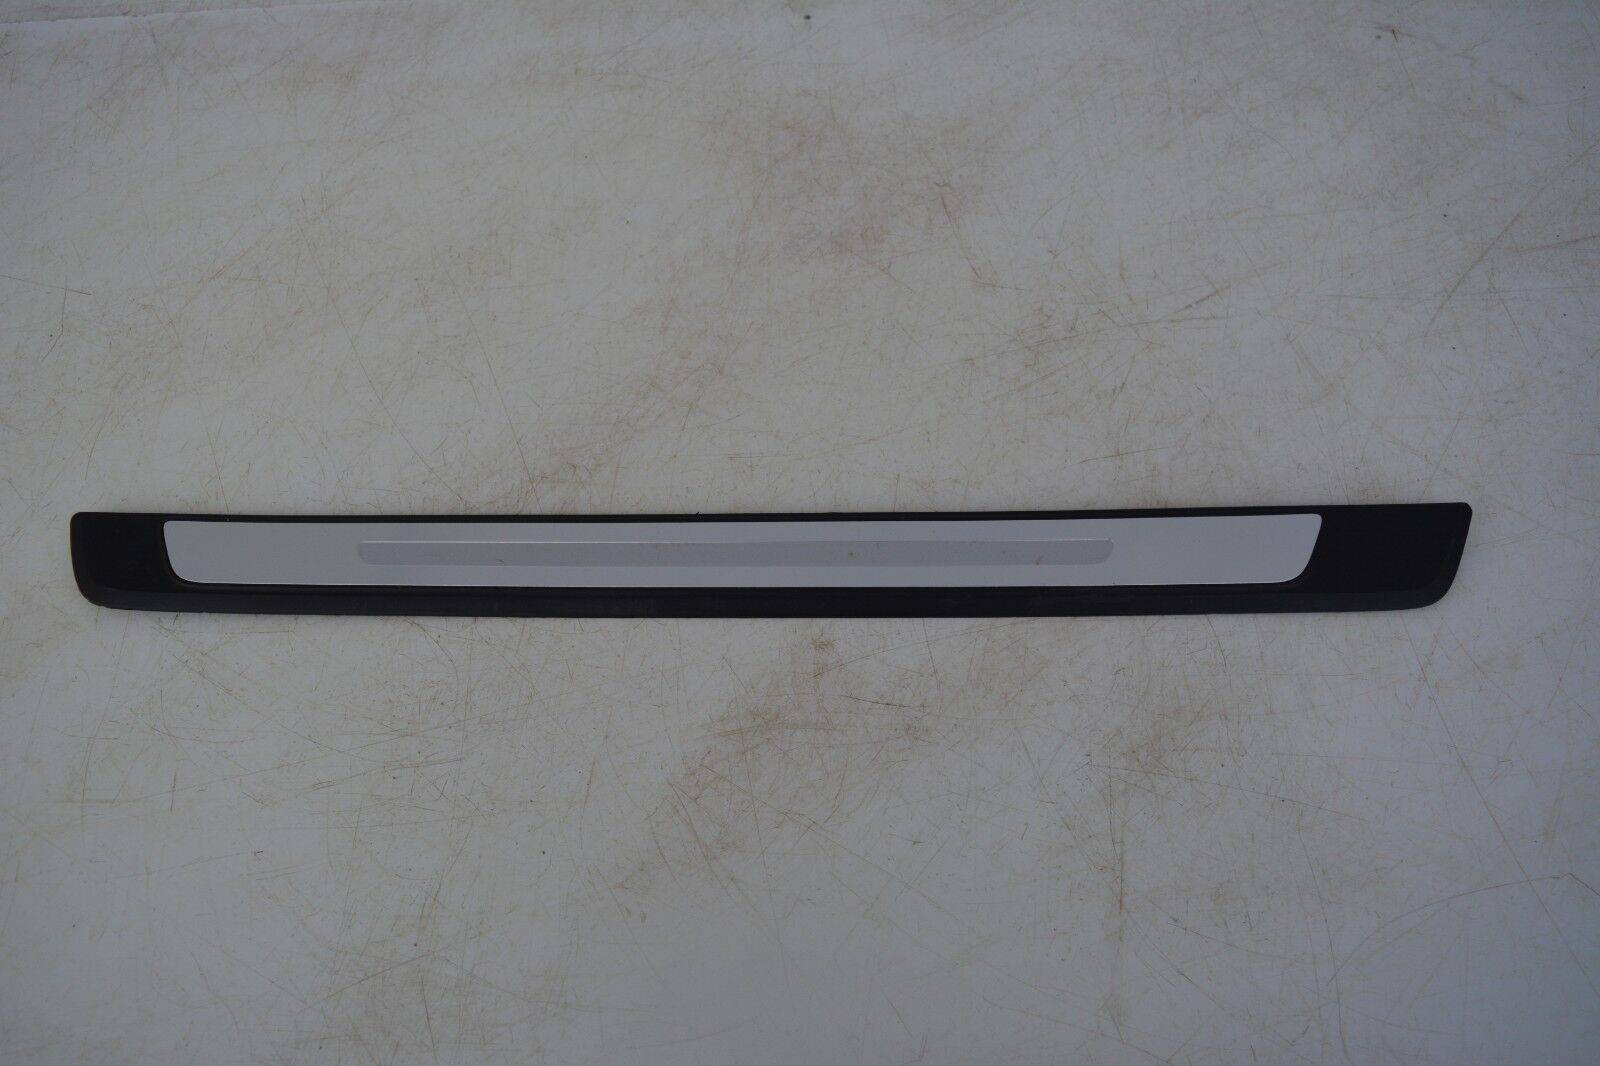 AUDI-A4-DOOR-SILL-ENTRY-TRIM-FRONT-LEFT-2015-2018-175367529874